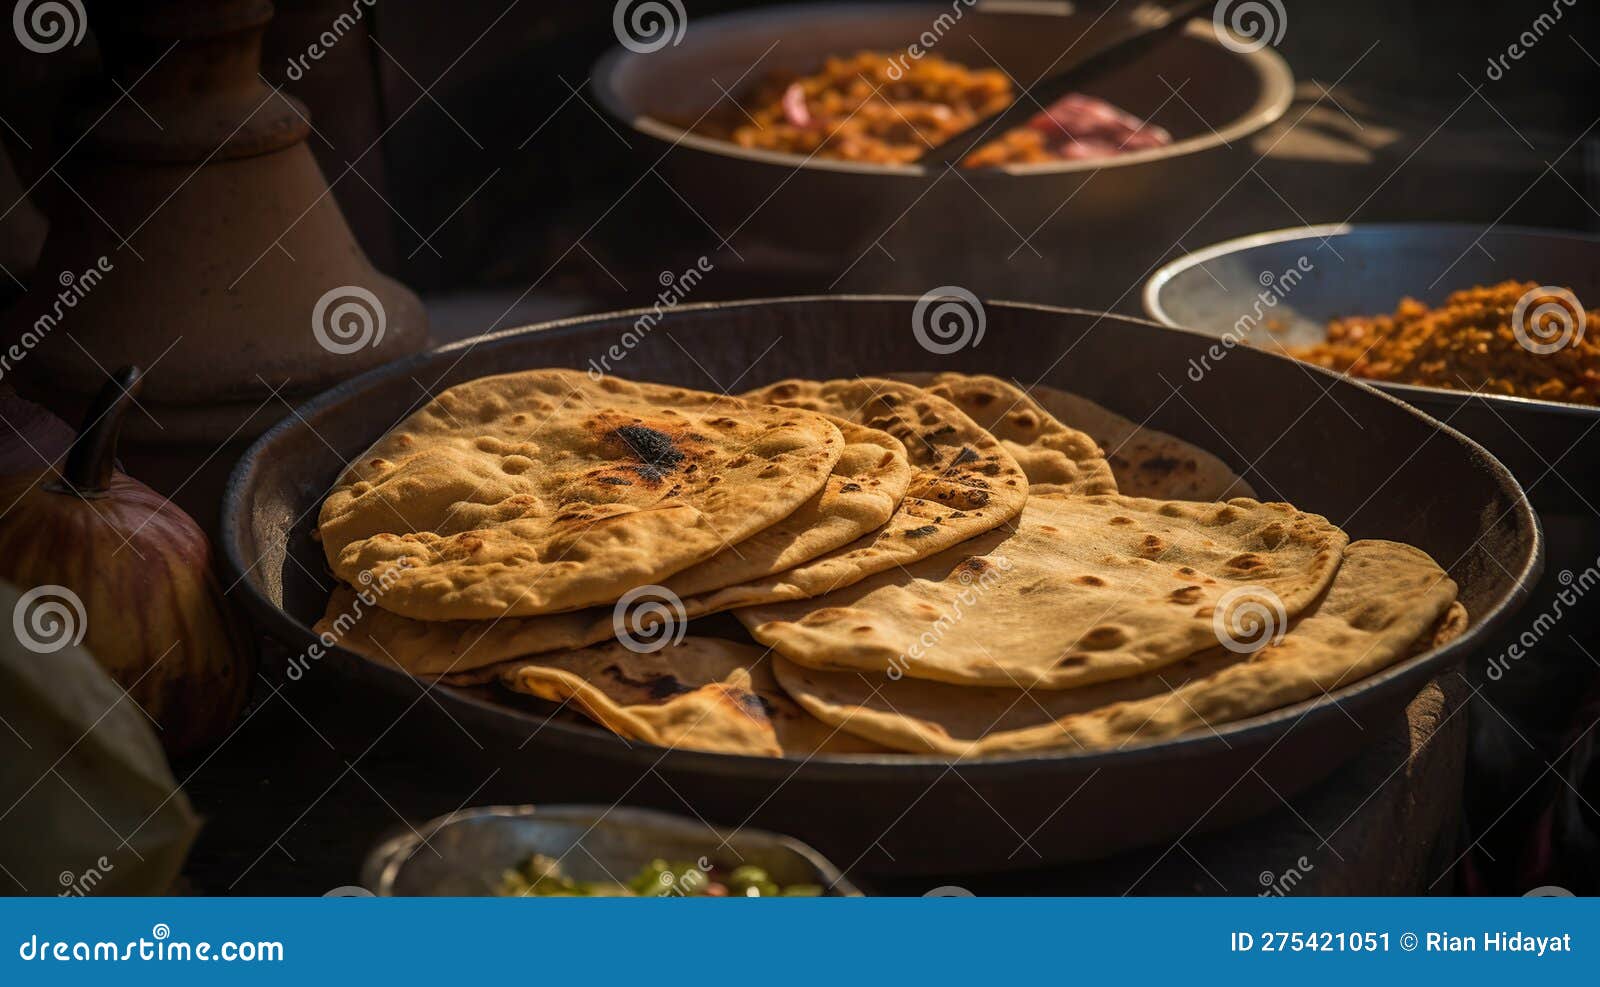 Image of Homemade Fresh Wheat Flour Chapati Or Roti Which Is An Indian Flat  Bread-MP653223-Picxy